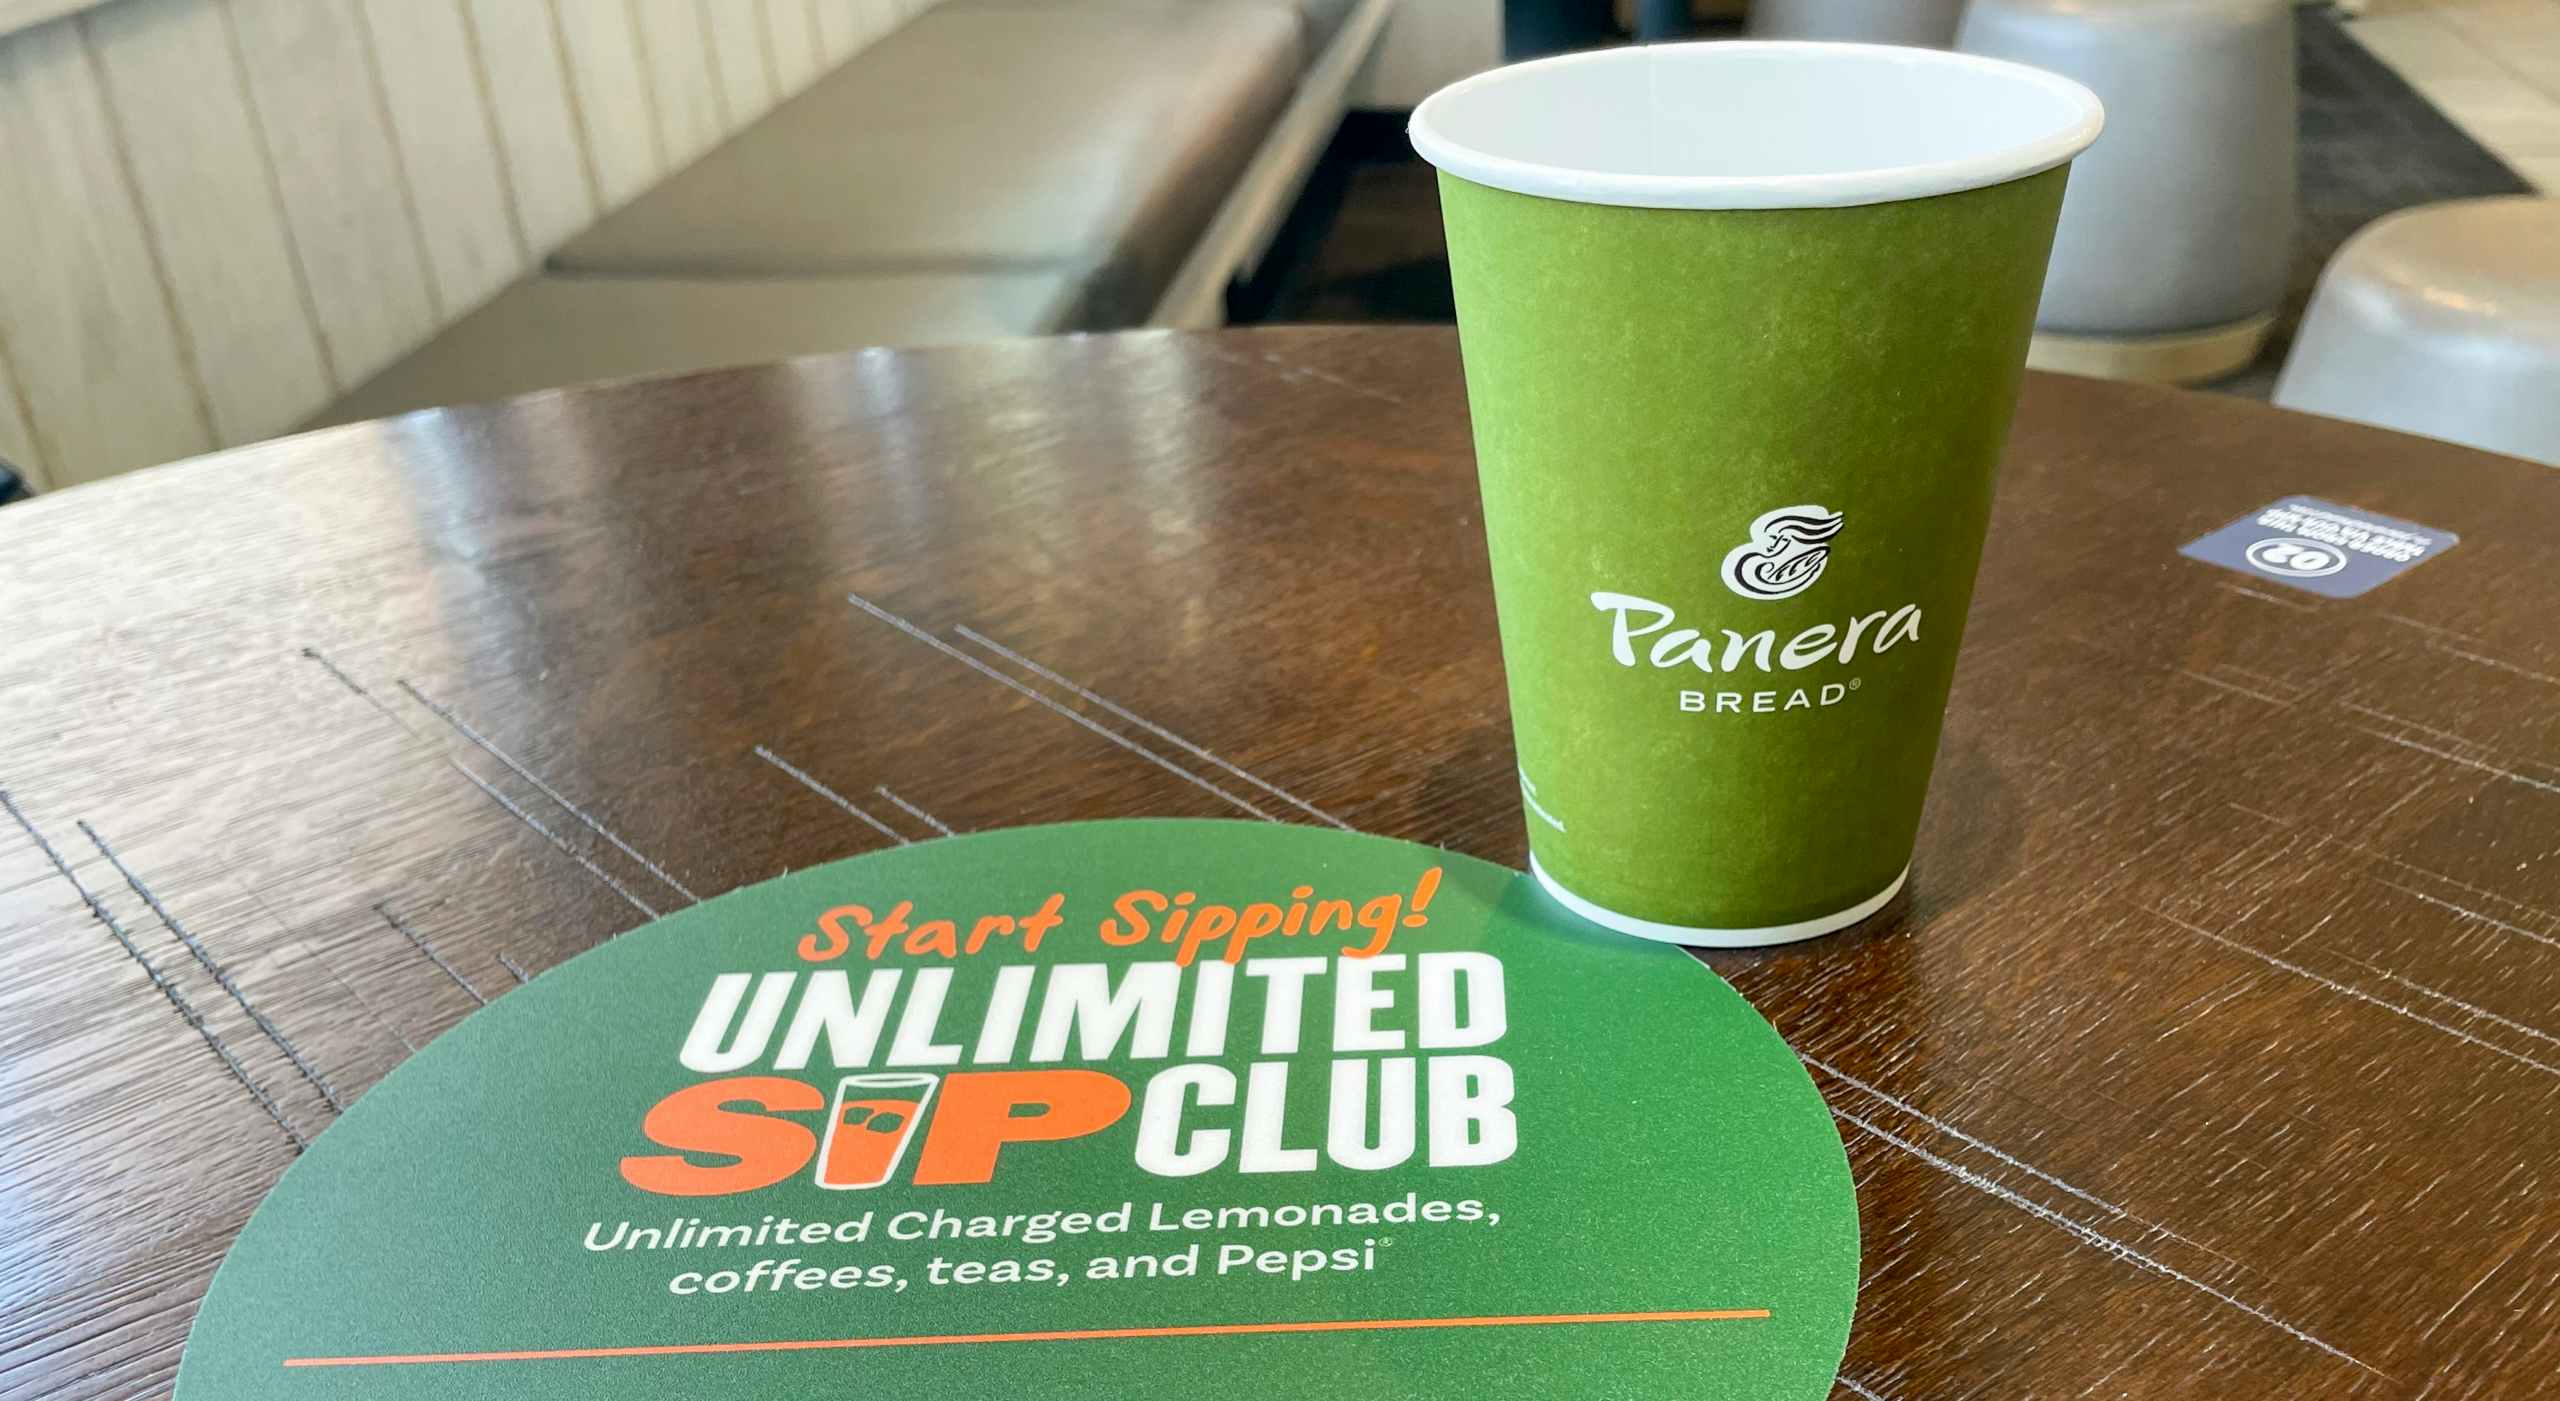 A panera bread cup next to an unlimited sip club sticker on a table.